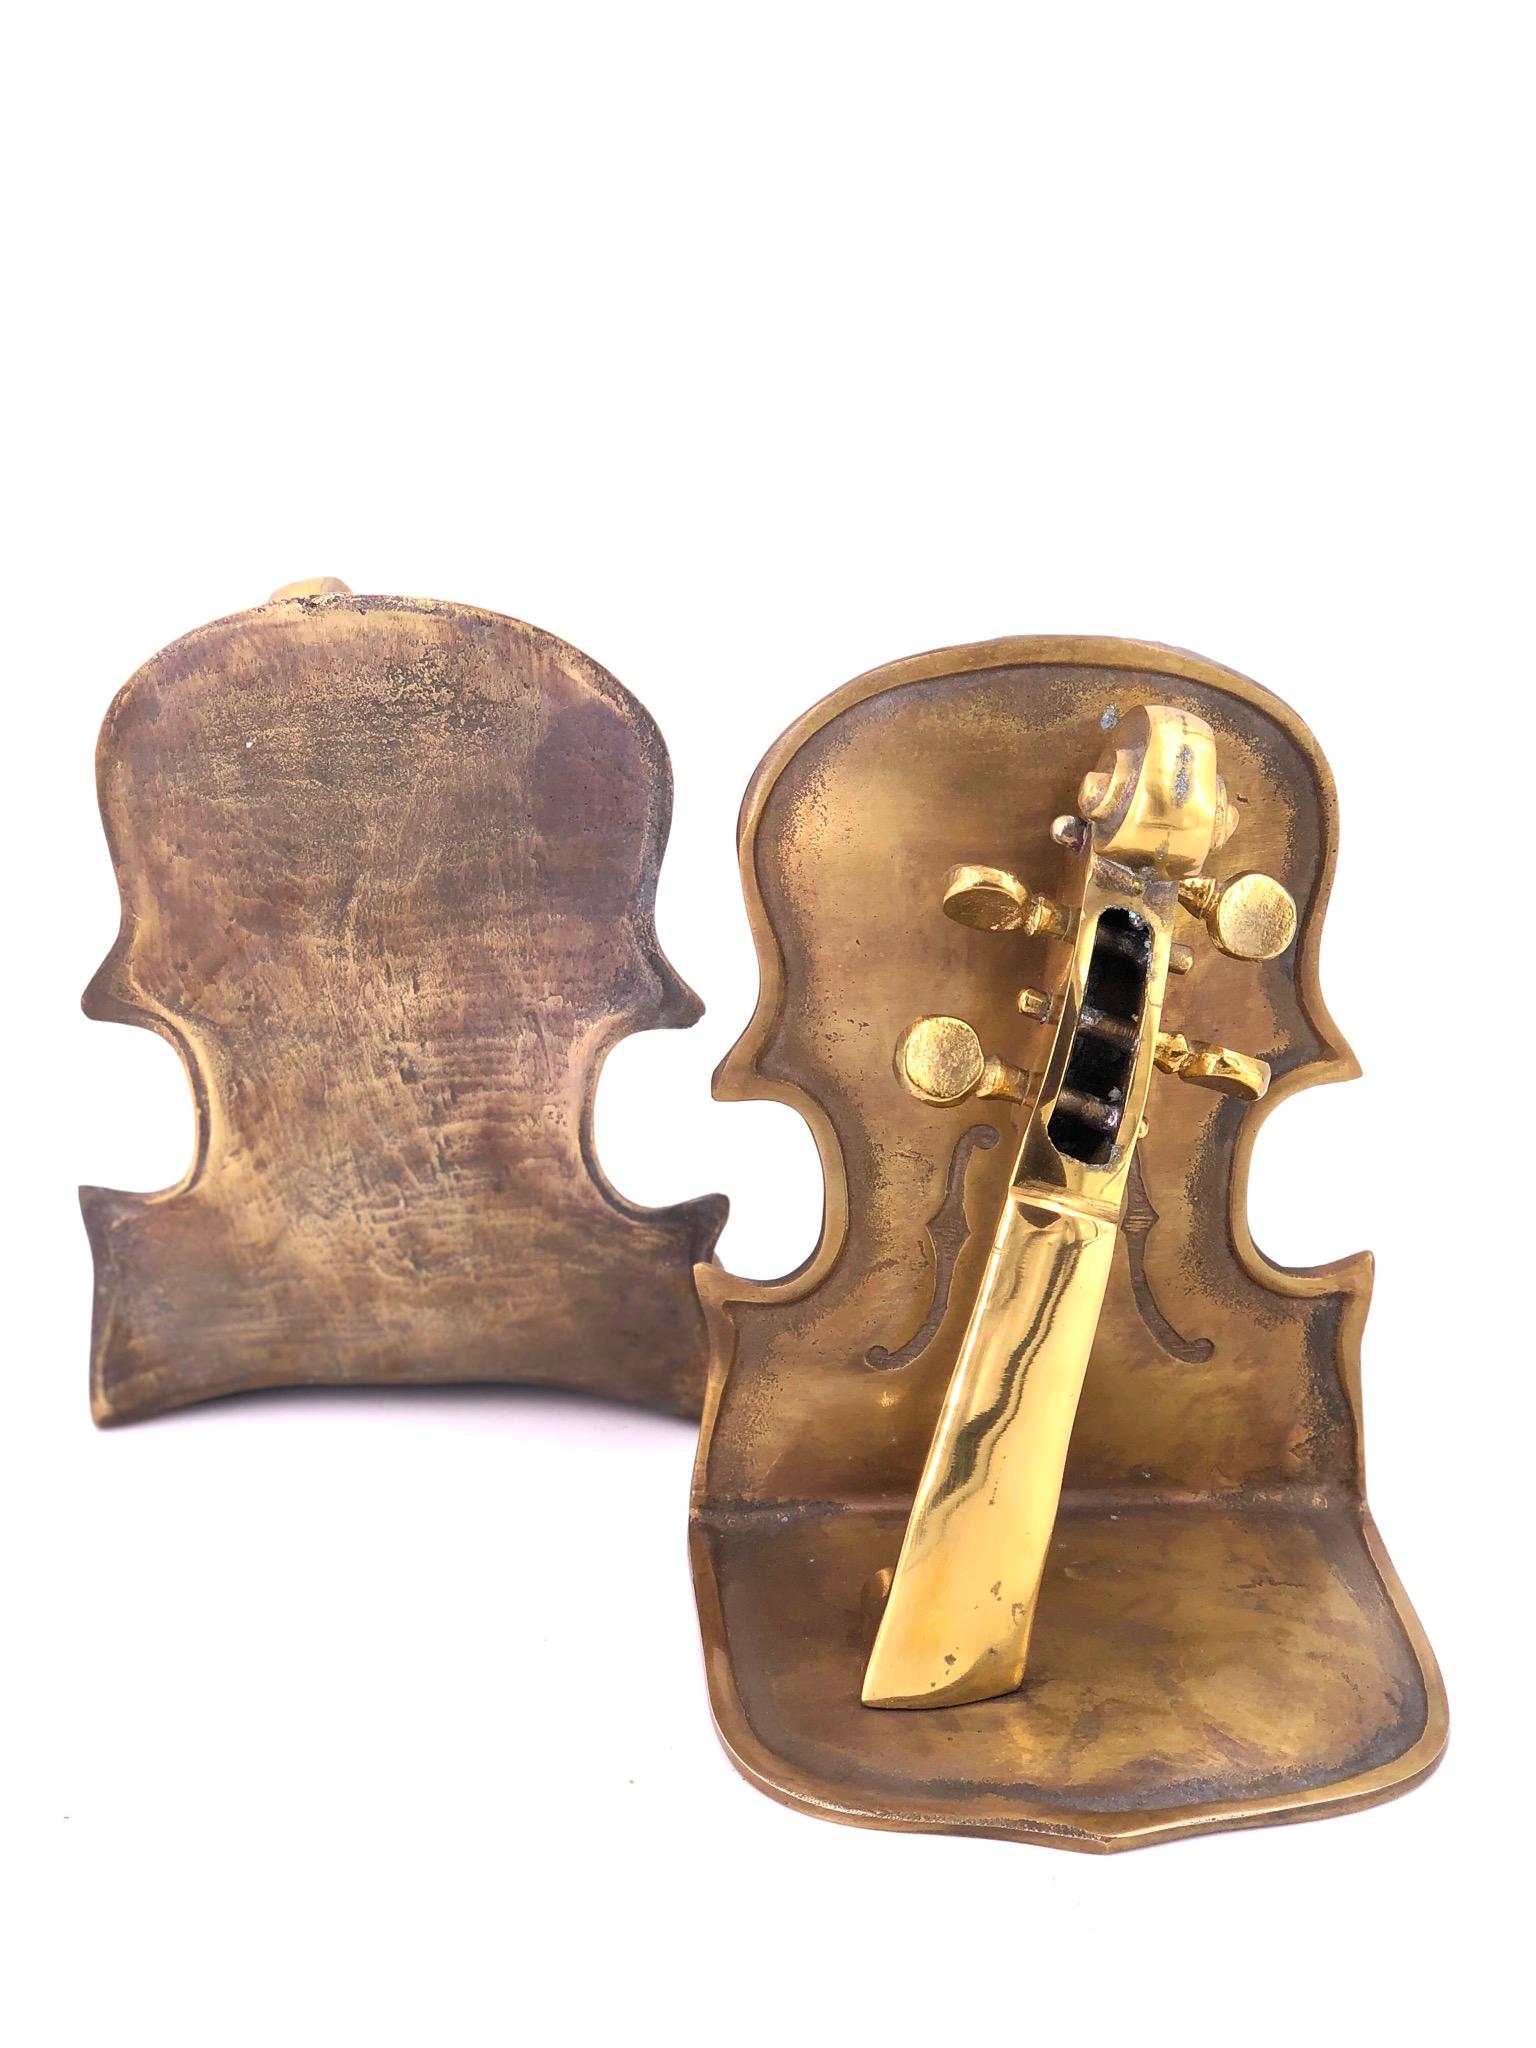 American Solid Pair of Polished Patinated Brass Cello Bookends For Sale